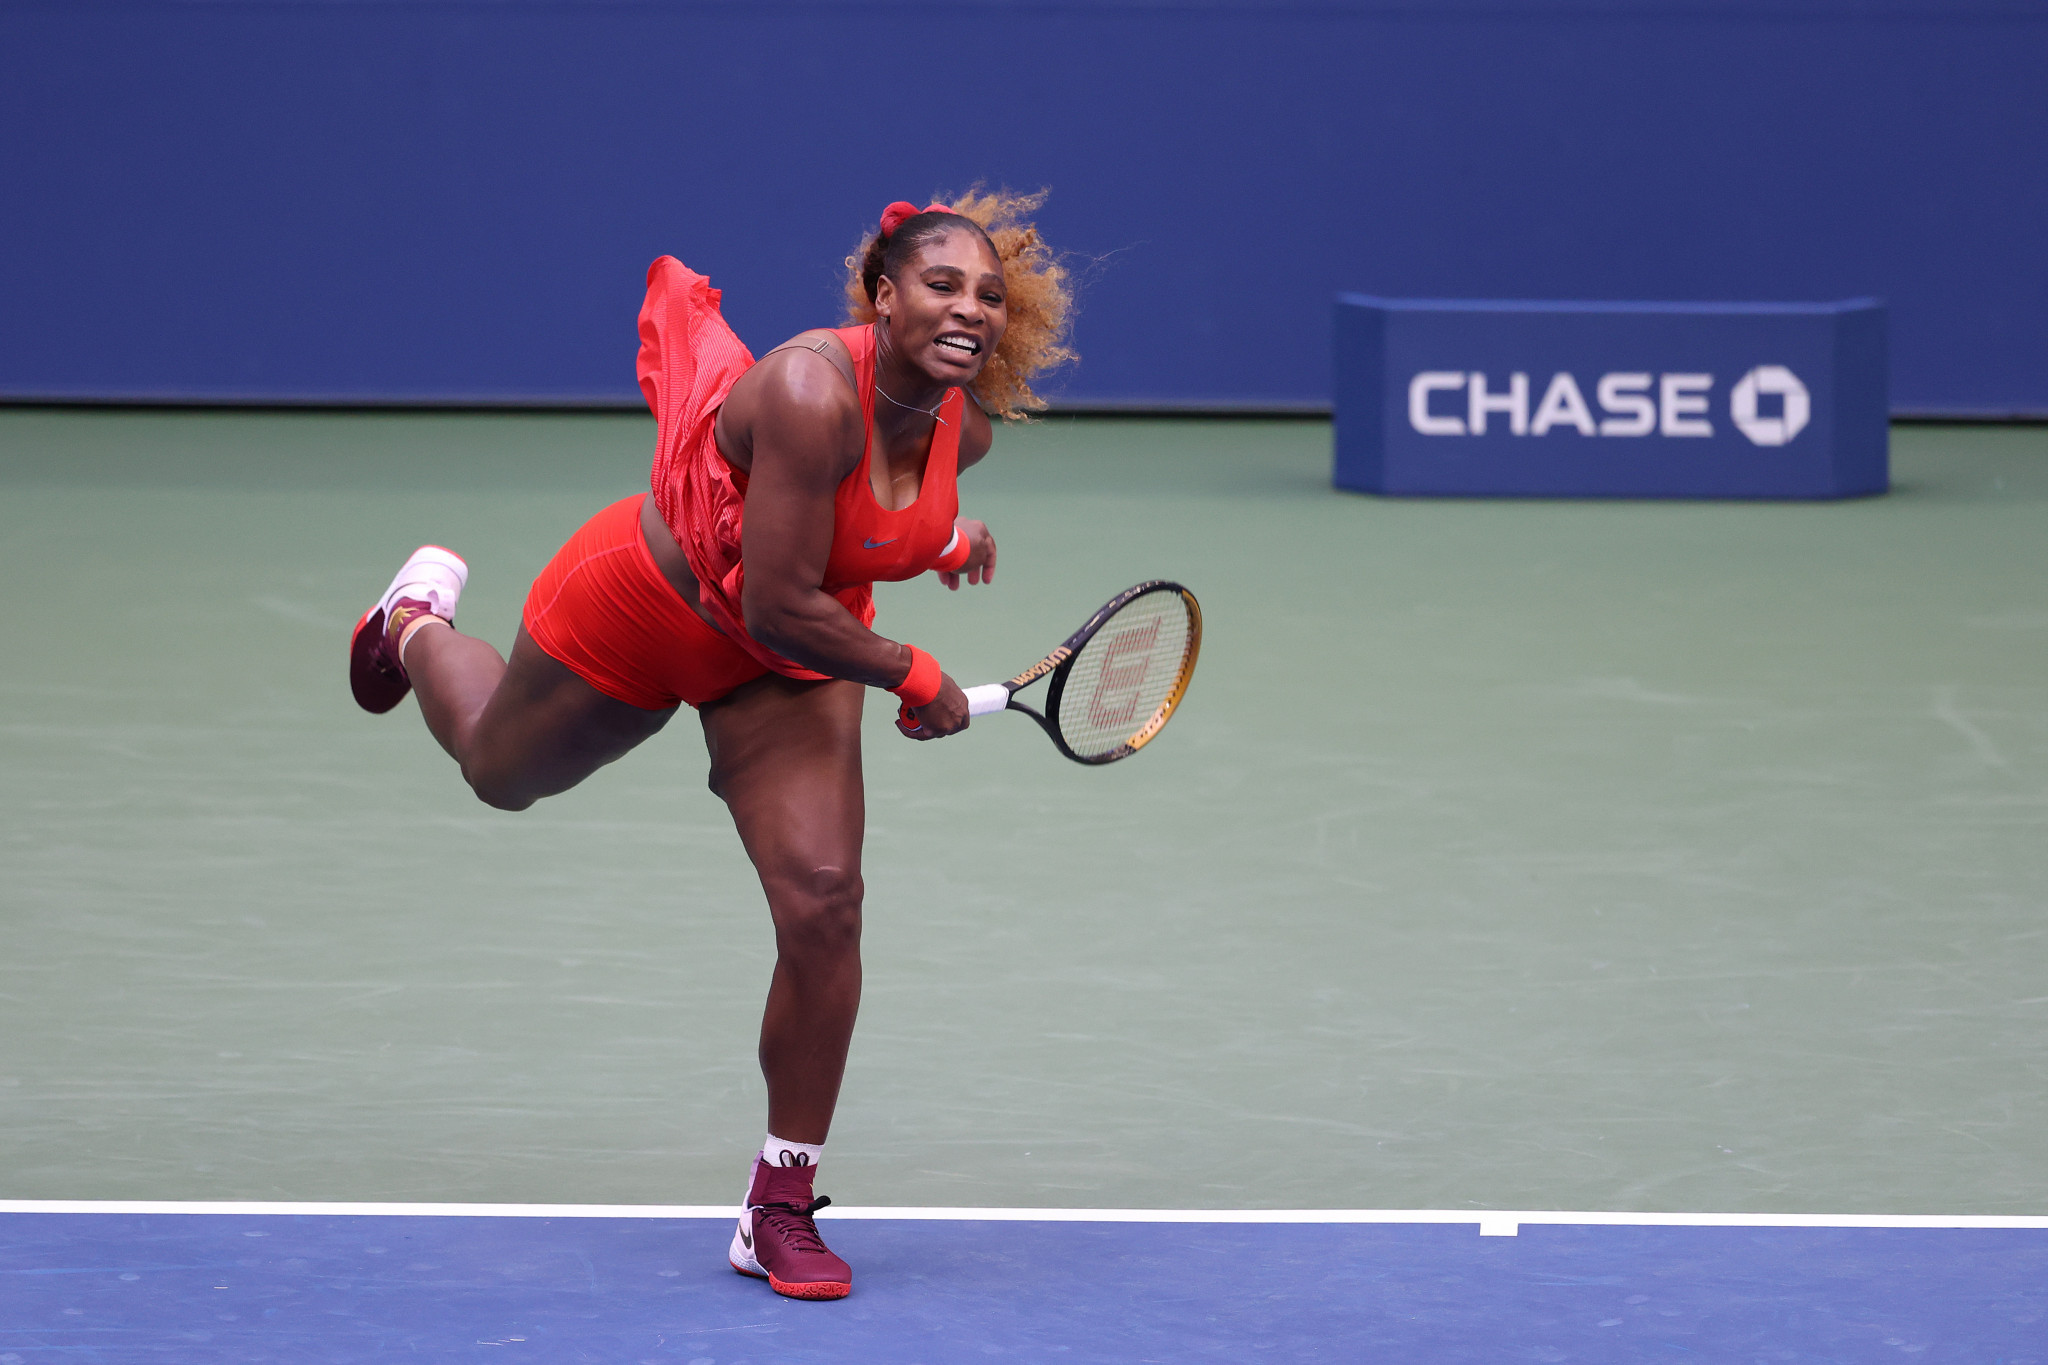 Third seed Serena Williams won in straight sets against compatriot Kristie Ahn as she started her bid for a record-equalling 24th Grand Slam title ©Getty Images